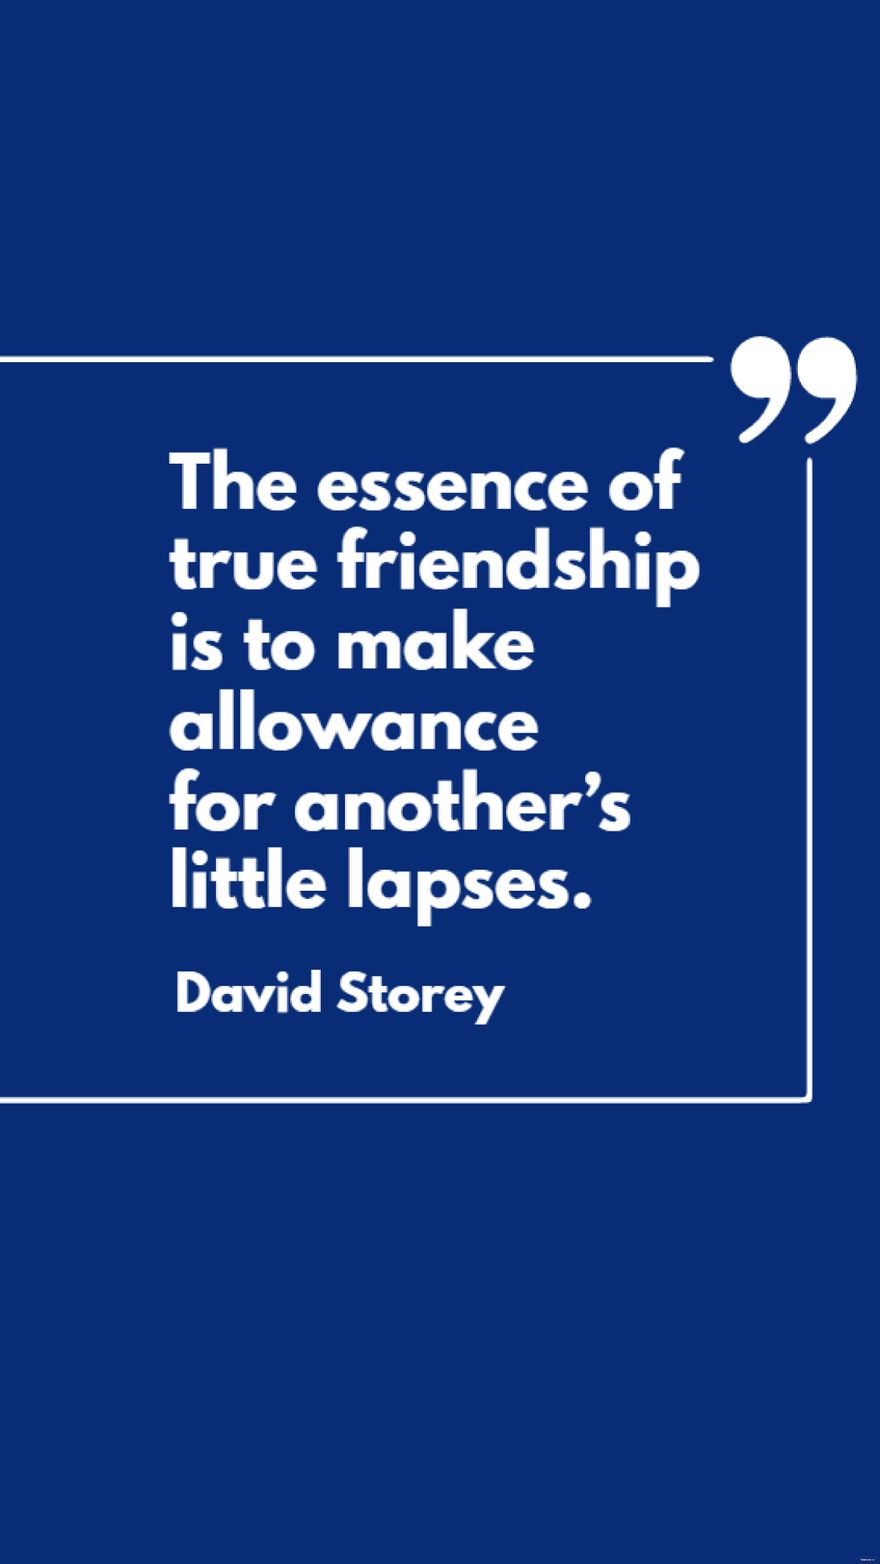 Free David Storey - The essence of true friendship is to make allowance for another’s little lapses.